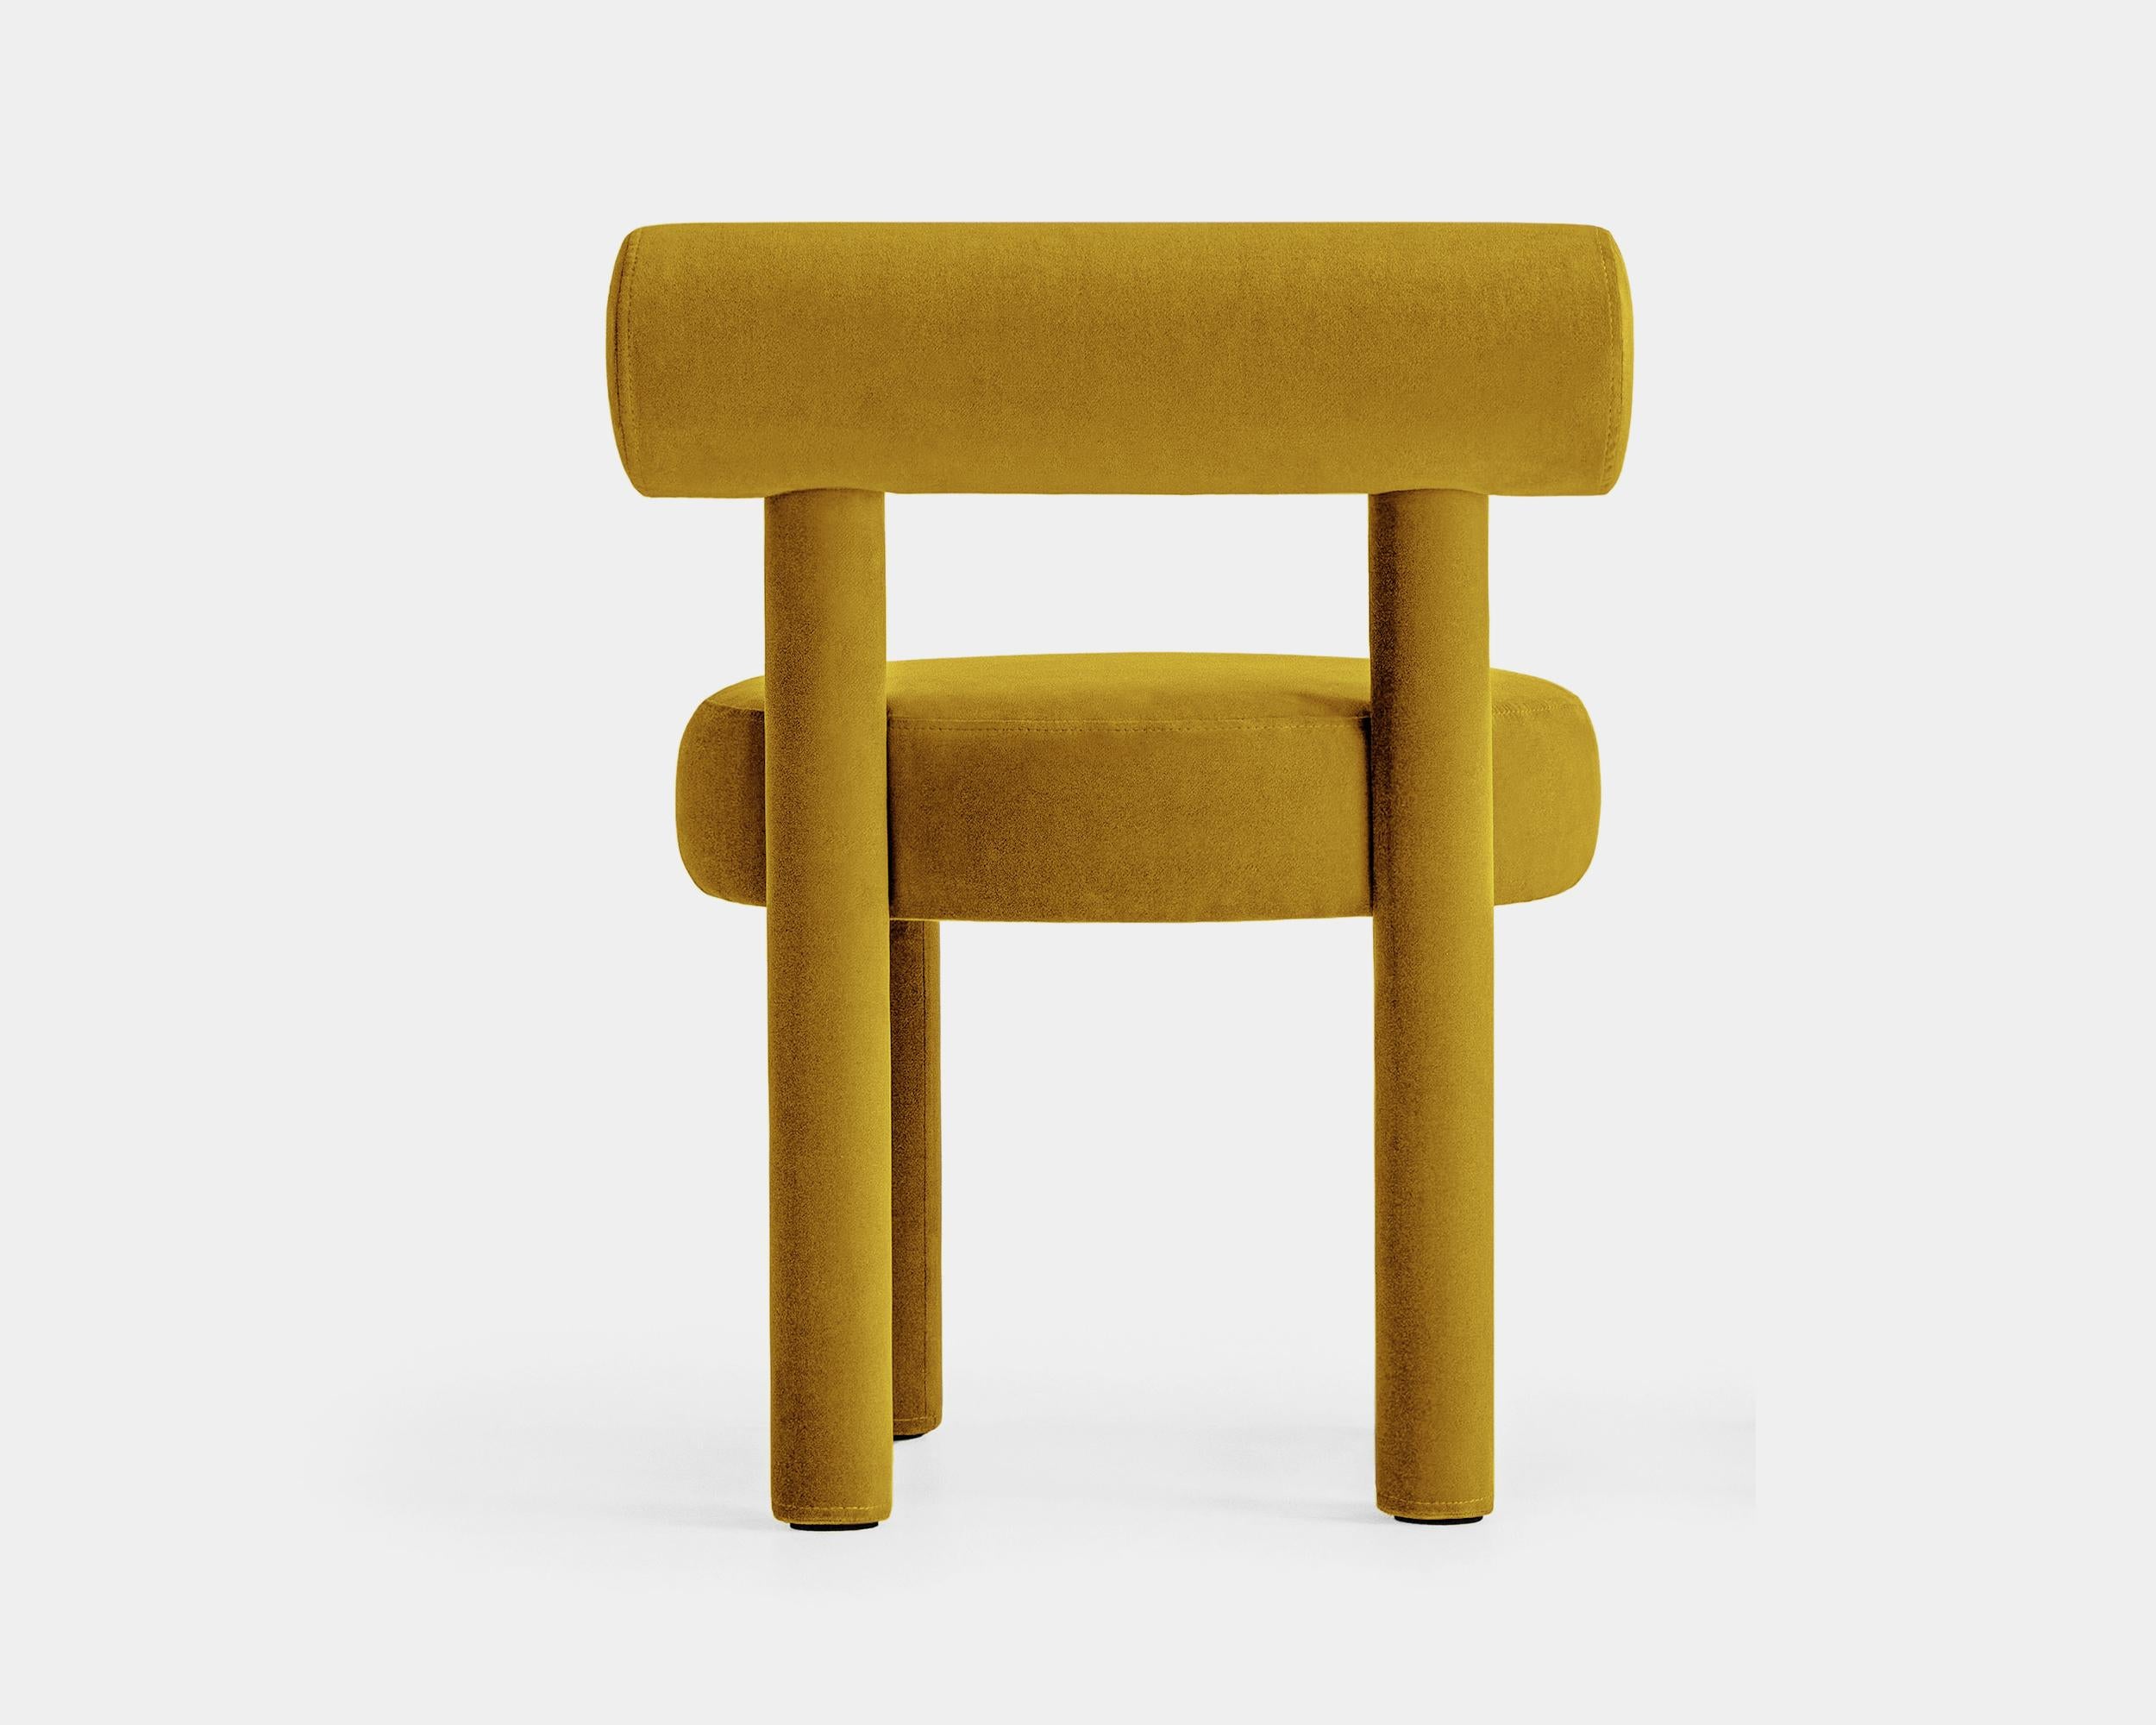 Chair Gropius CS1
Designer: Kateryna Sokolova

Model in the main picture : Collection - Magic velvet, Color - yellow 2234

Dimensions:
Height: 74 cm / 29,13 in
Width: 57 cm / 22,44 in
Depth: 57 cm / 22,44 in
Seat height: 47 cm / 18,11 in

New NOOM